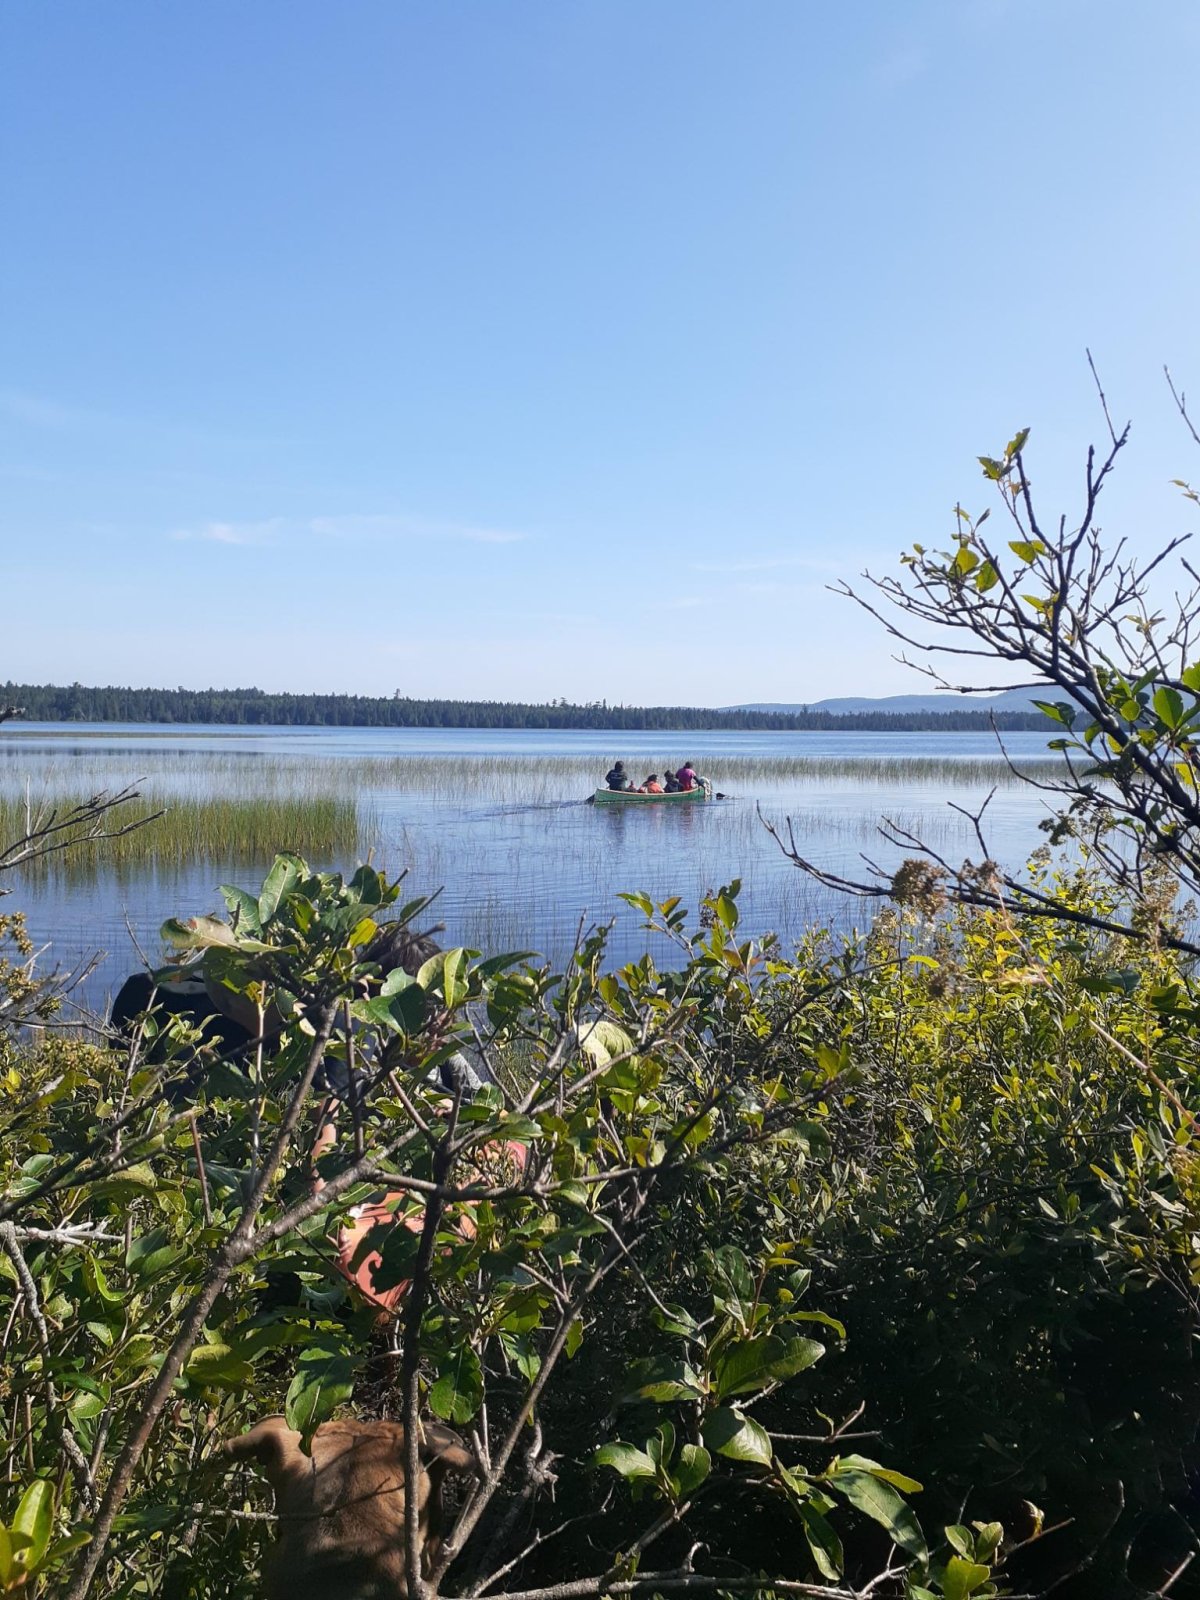 Wolastoqewi Mothers and Grandmothers canoeing on Miramichi Lake in an effort to prevent the spraying of a pesticide on the water to eradicate the invasive smallmouth bass.